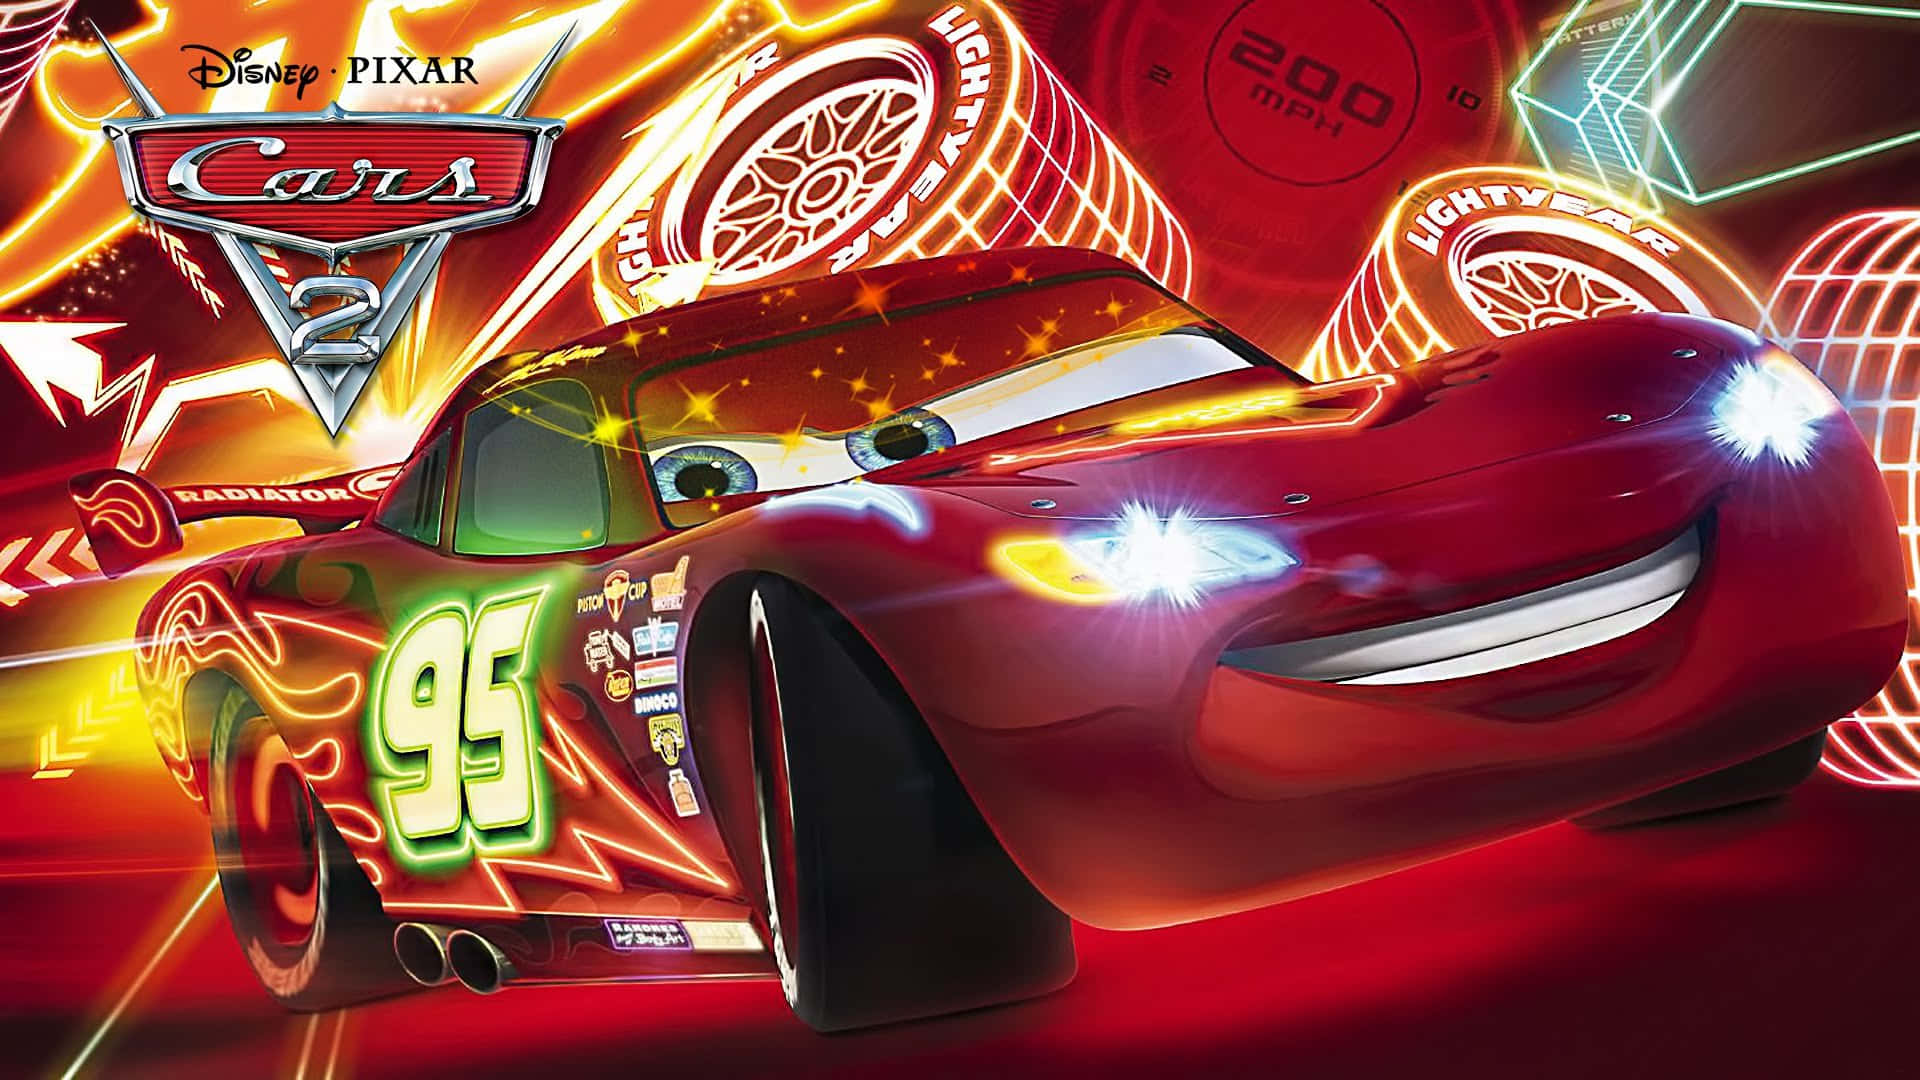 Lightning McQueen races down the track in full speed